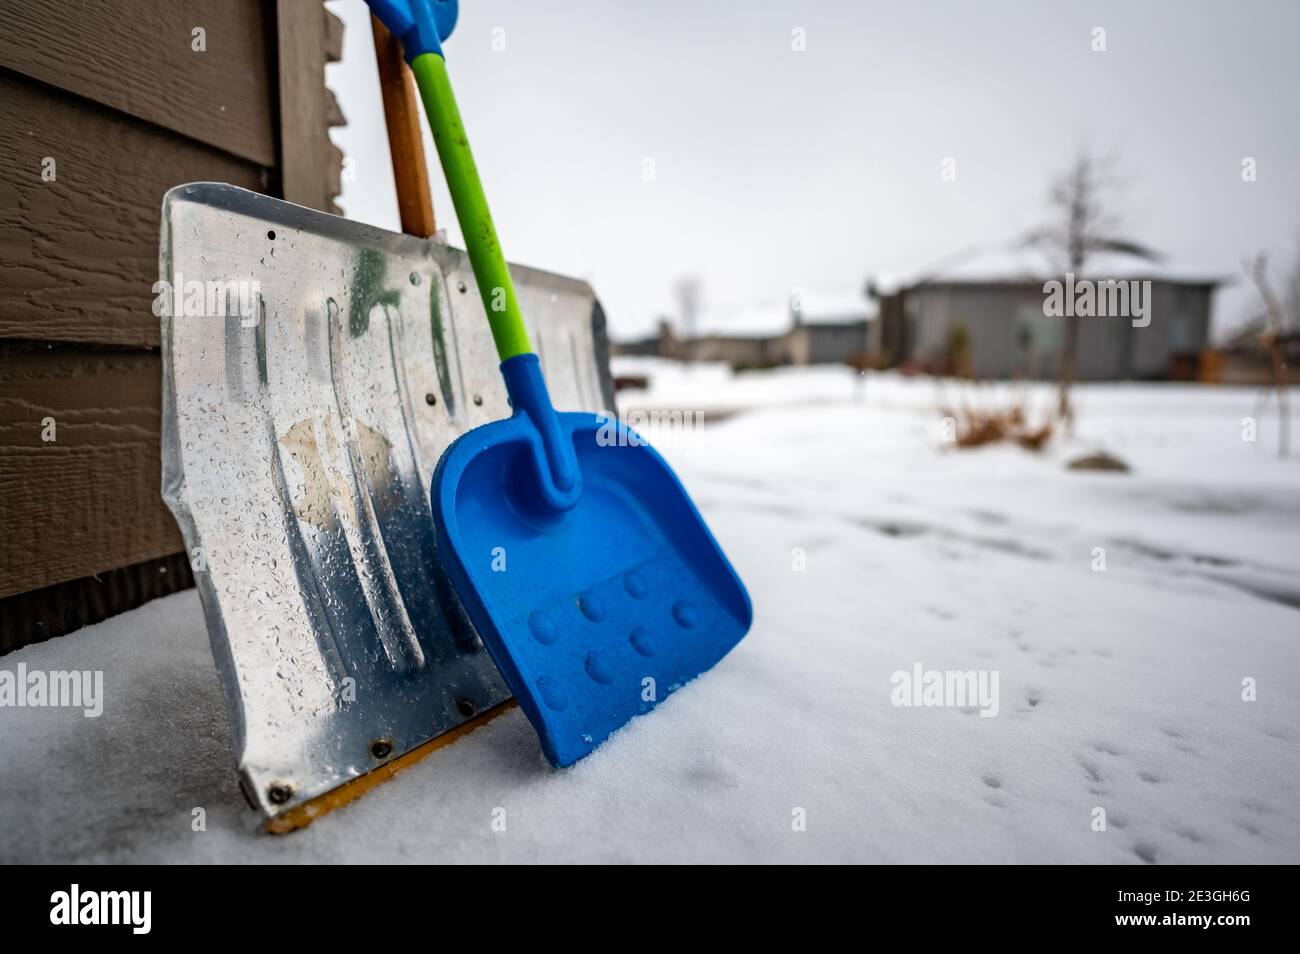 Adult metal shovel and child toy plastic shovel to imply working together to clear snow Stock Photo